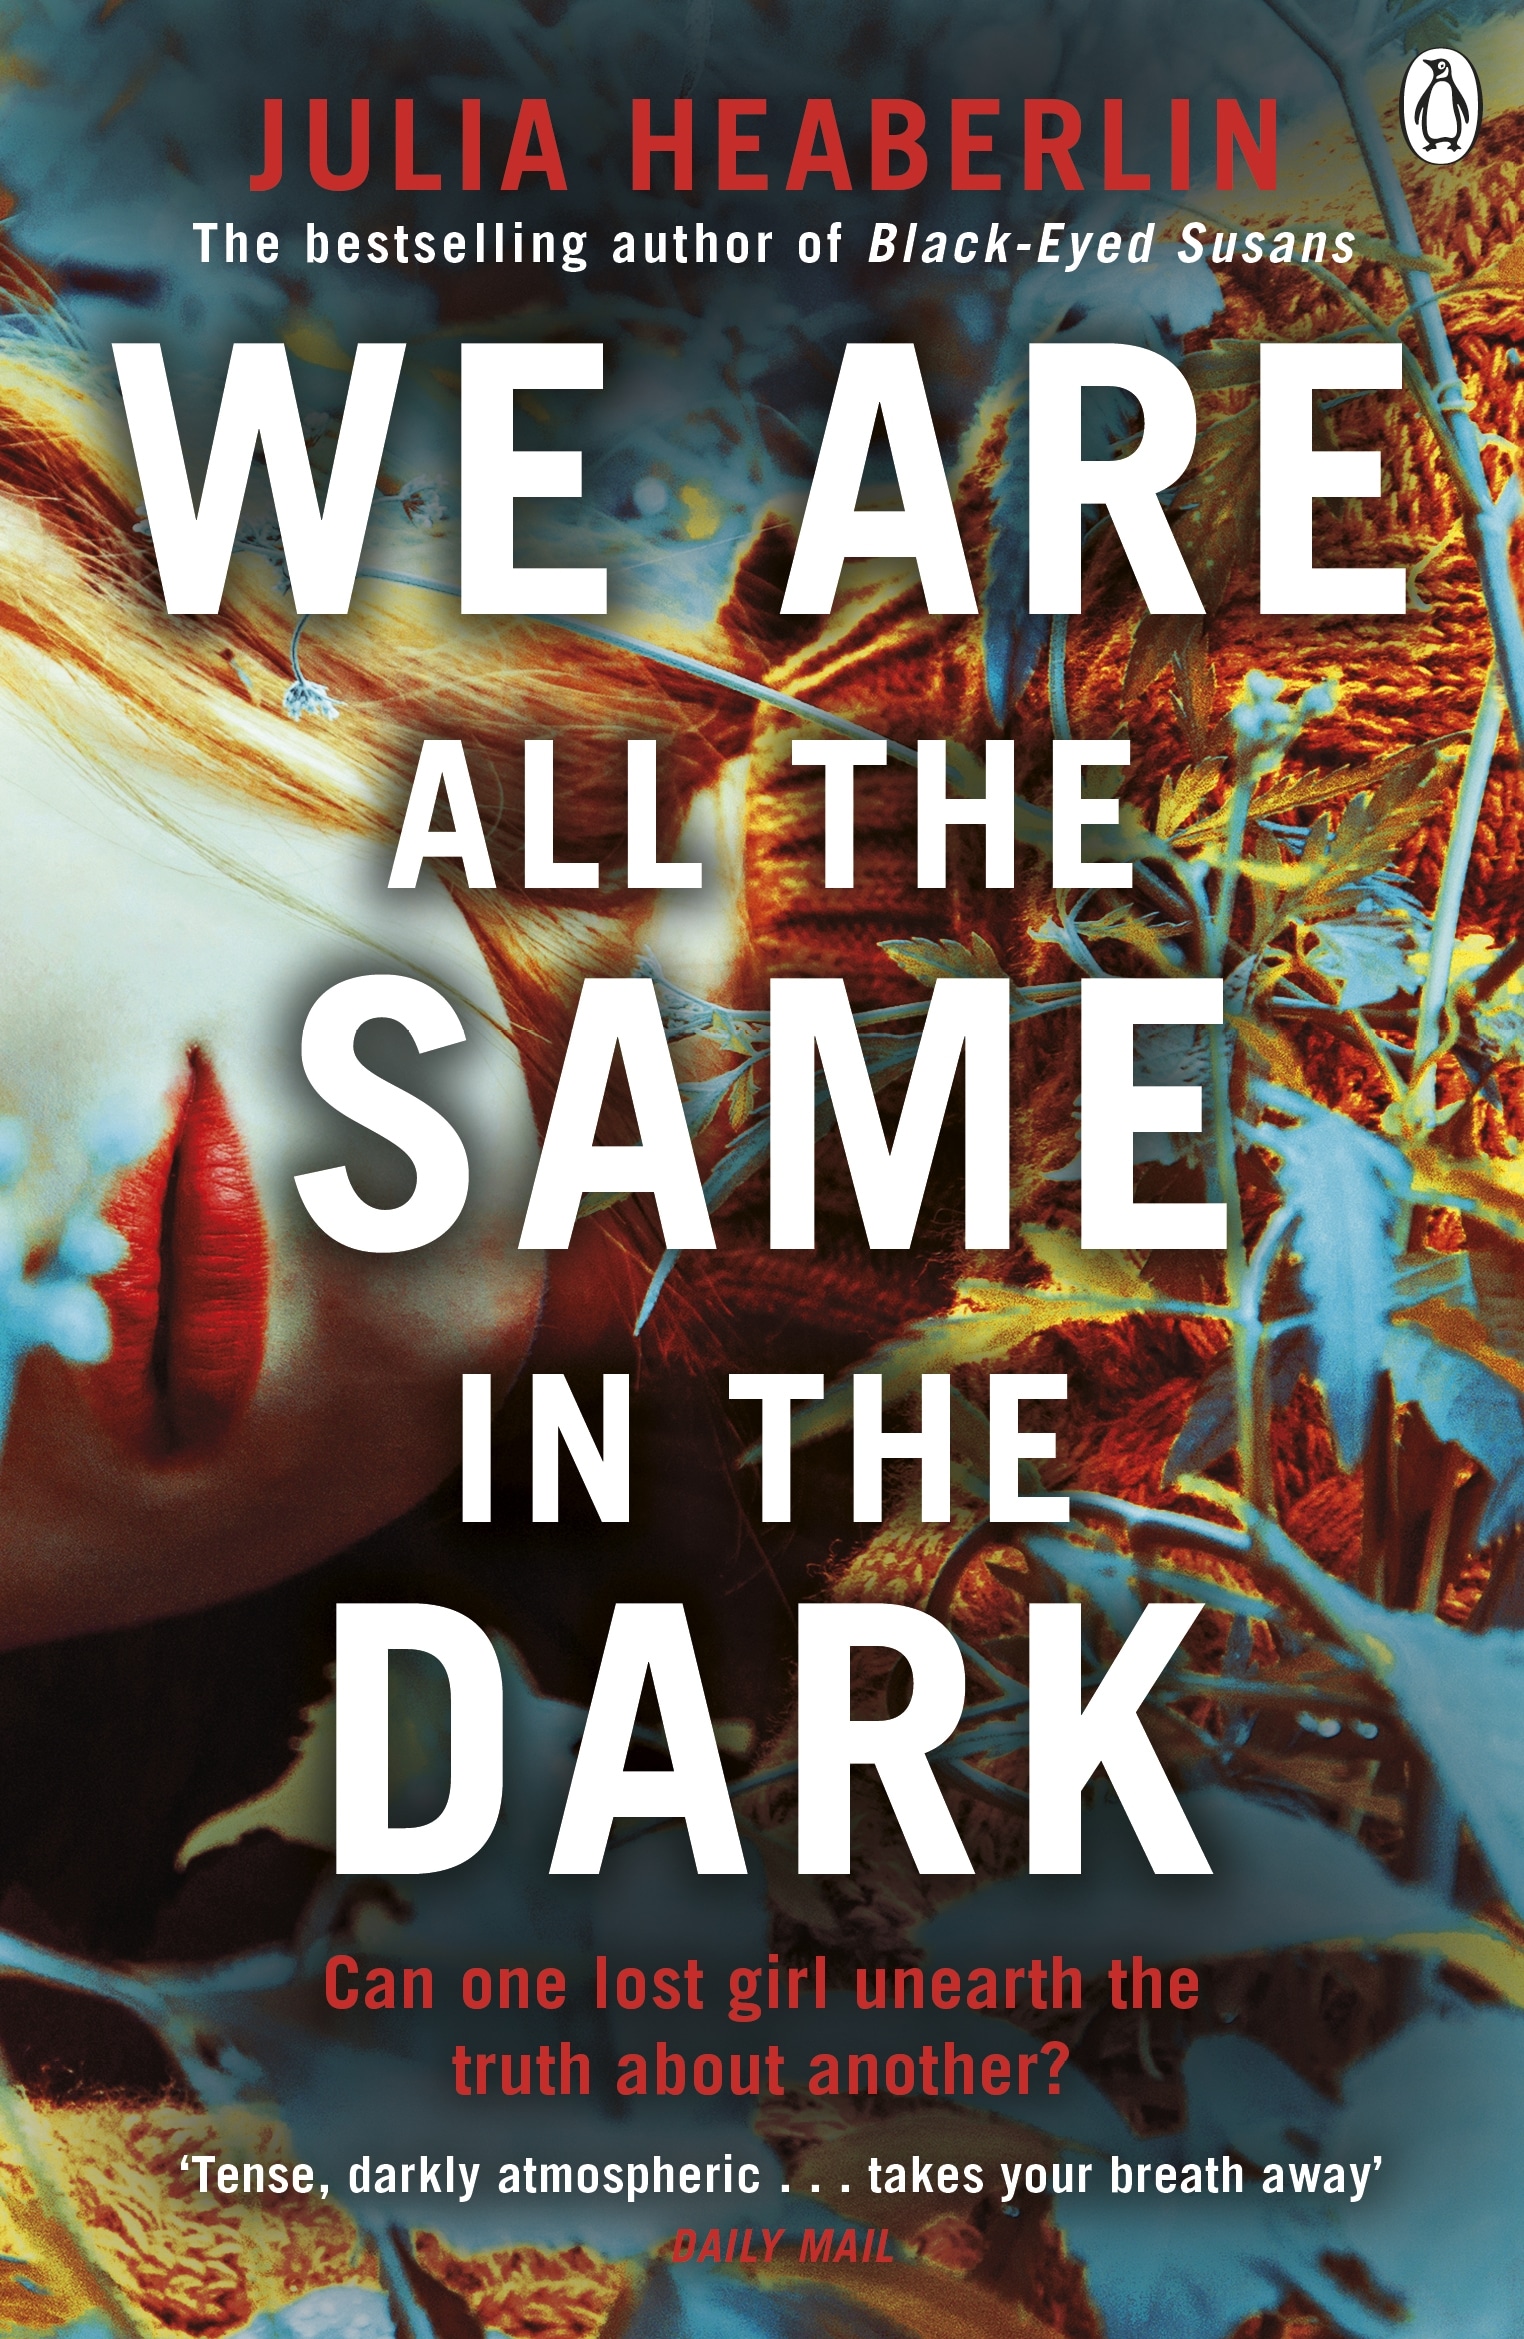 Book “We Are All the Same in the Dark” by Julia Heaberlin — September 2, 2021